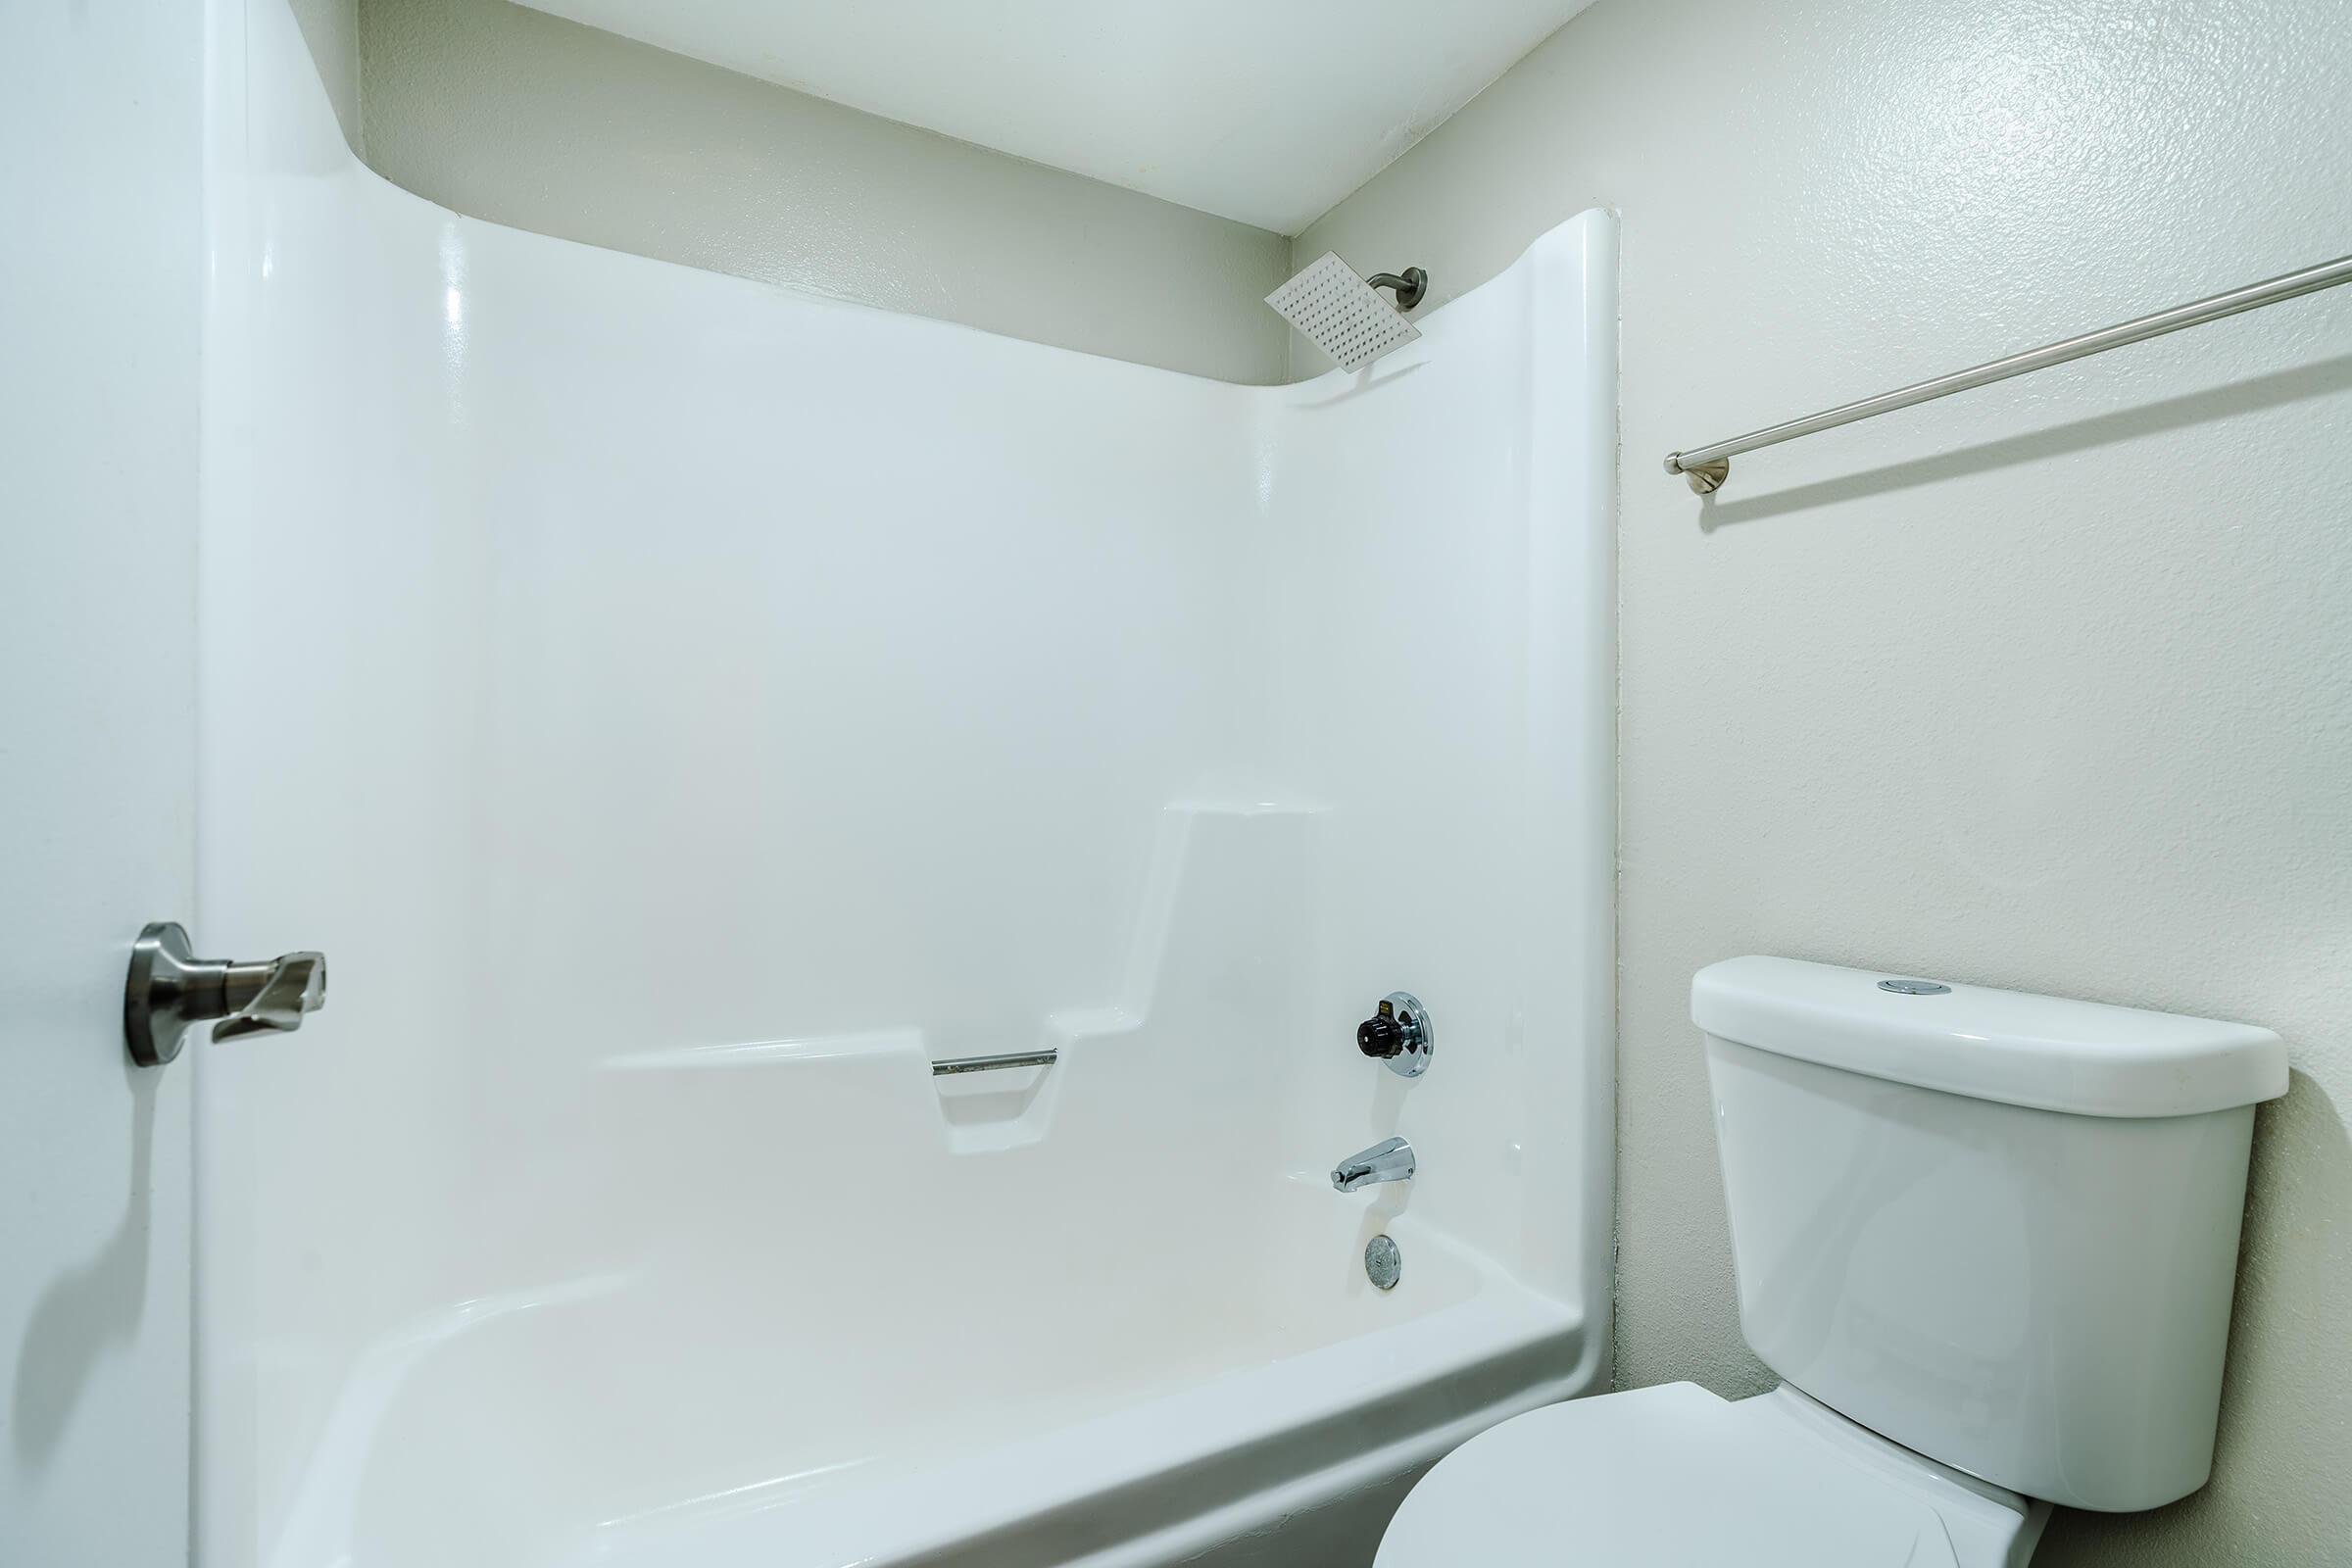 Close up view of a white shower tub and toilet